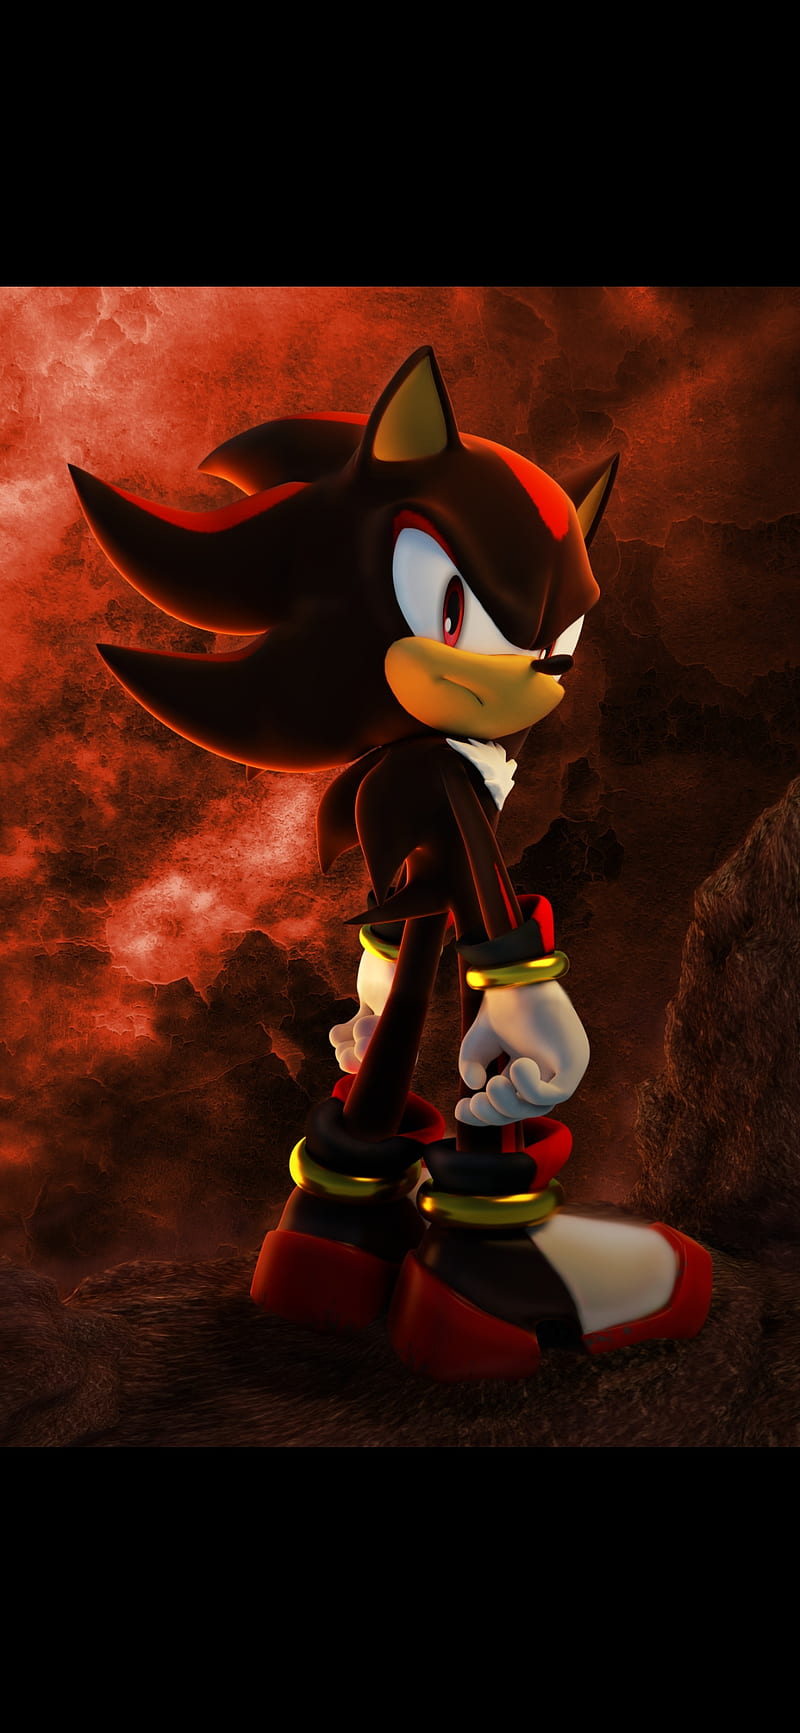 Shadow the Hedgehog» 1080P, 2k, 4k HD wallpapers, backgrounds free download  | Rare Gallery